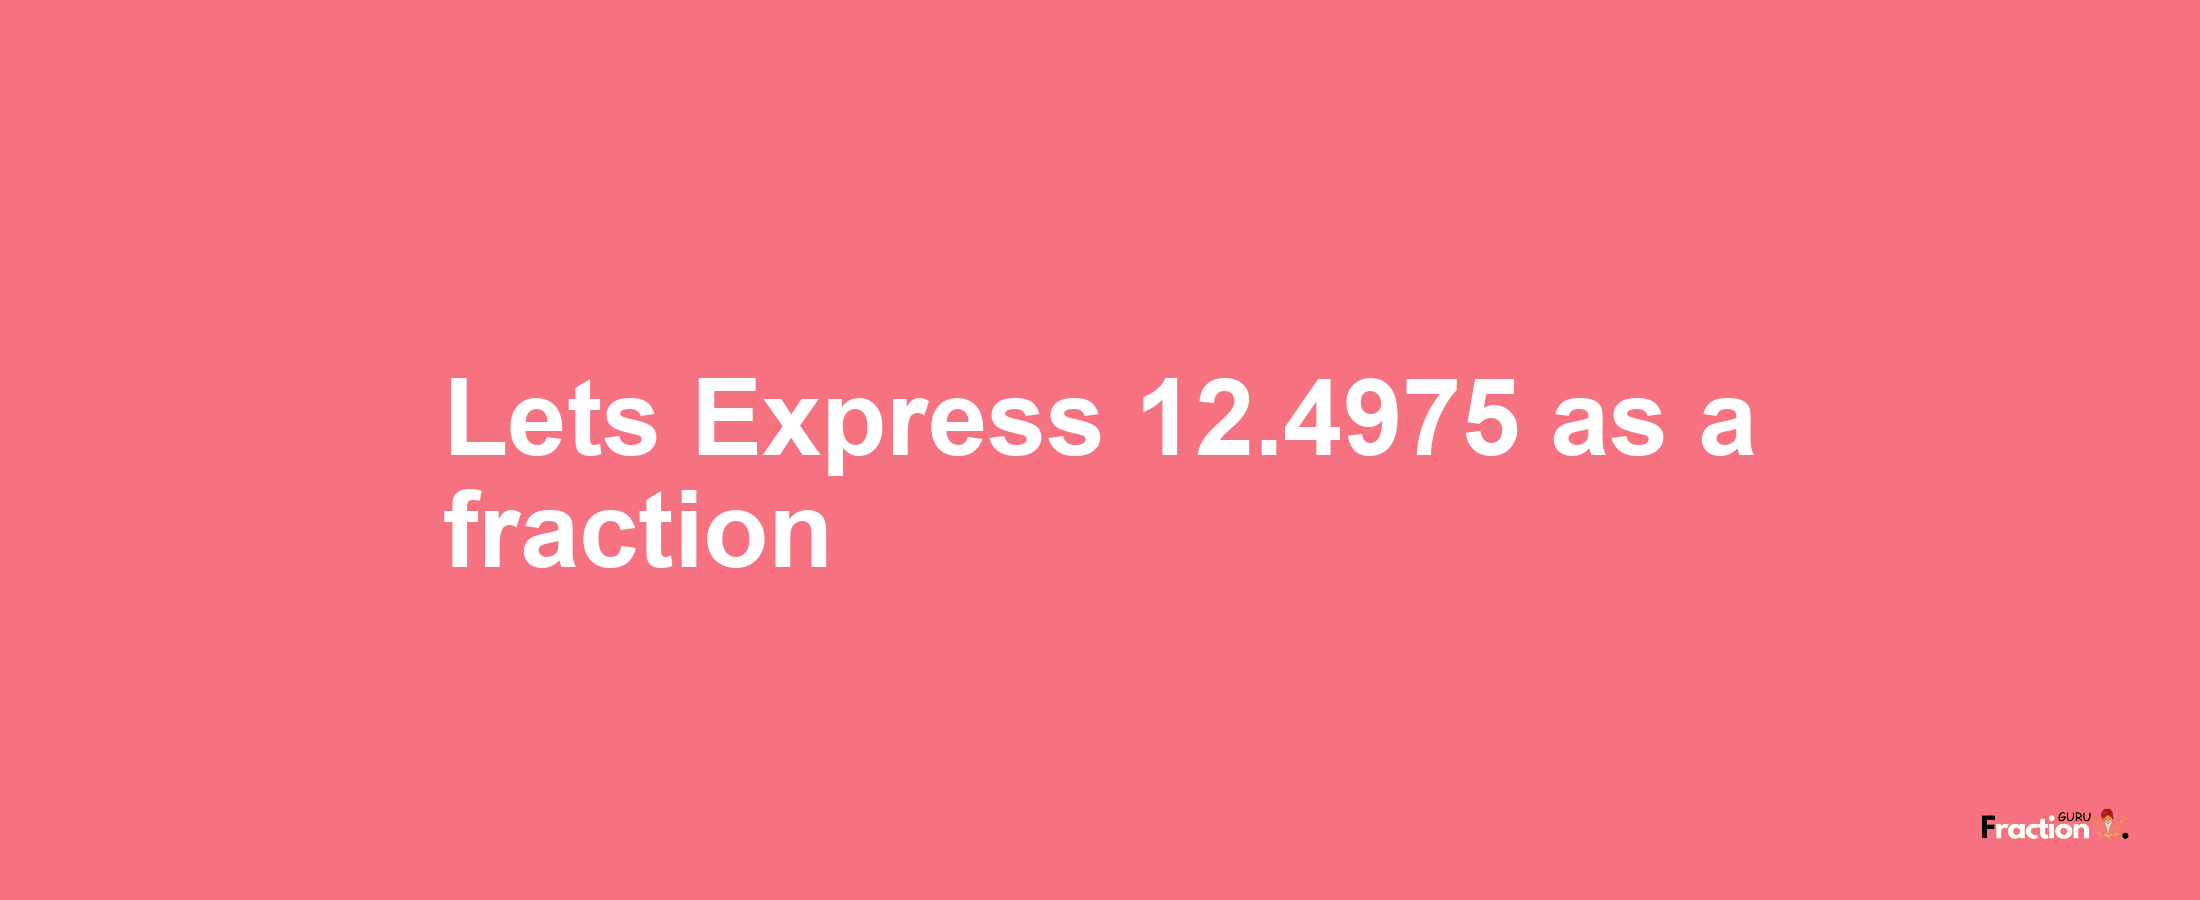 Lets Express 12.4975 as afraction